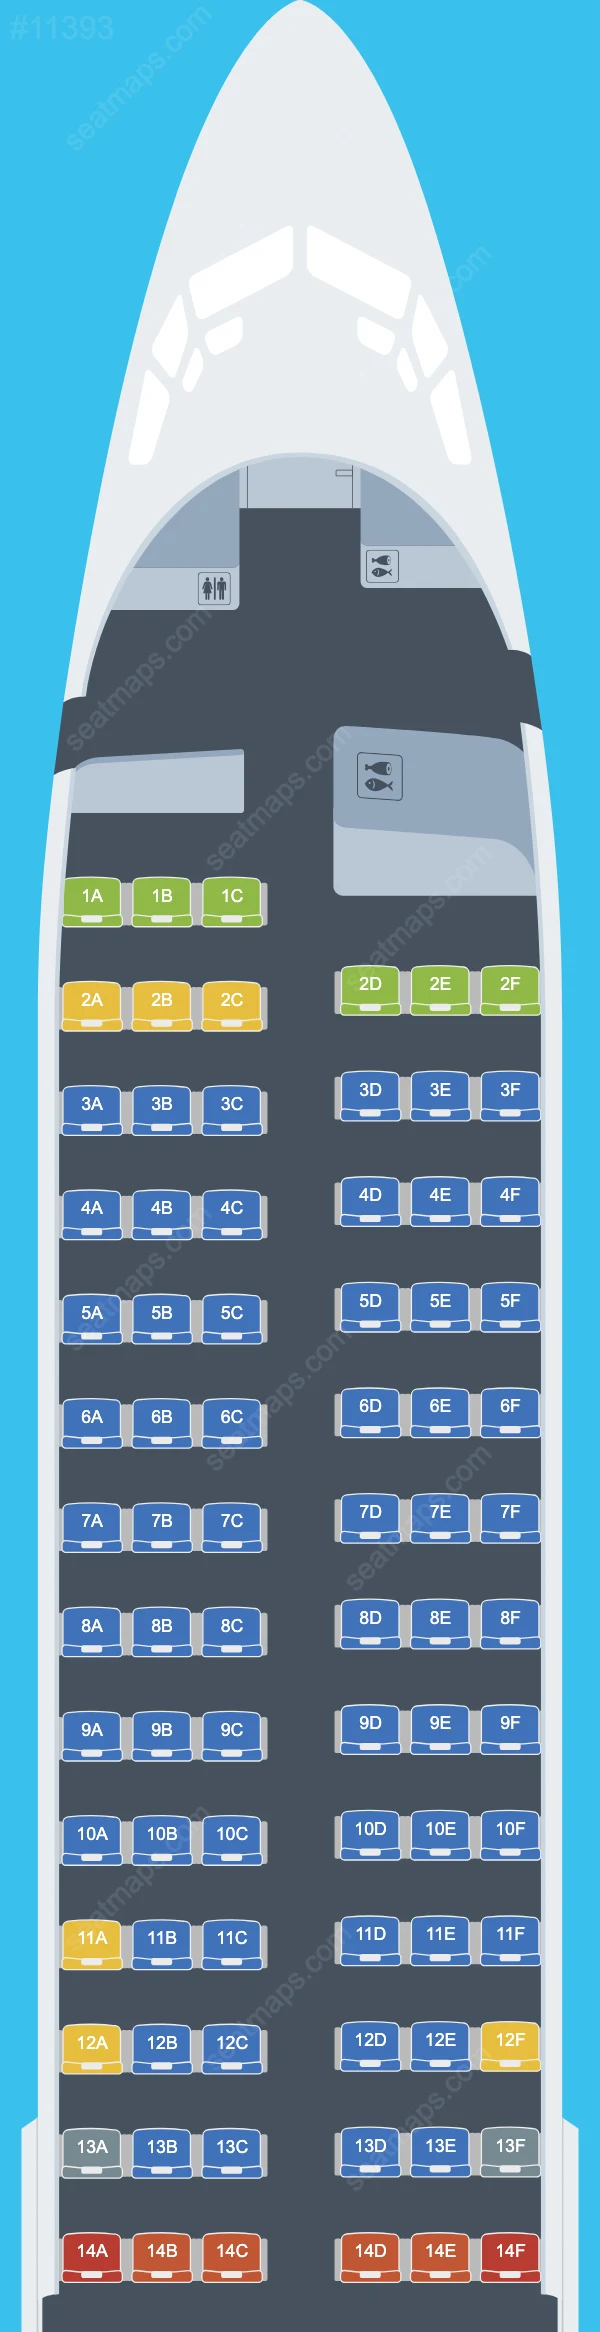 Hello Jets Boeing 737-800 seatmap preview